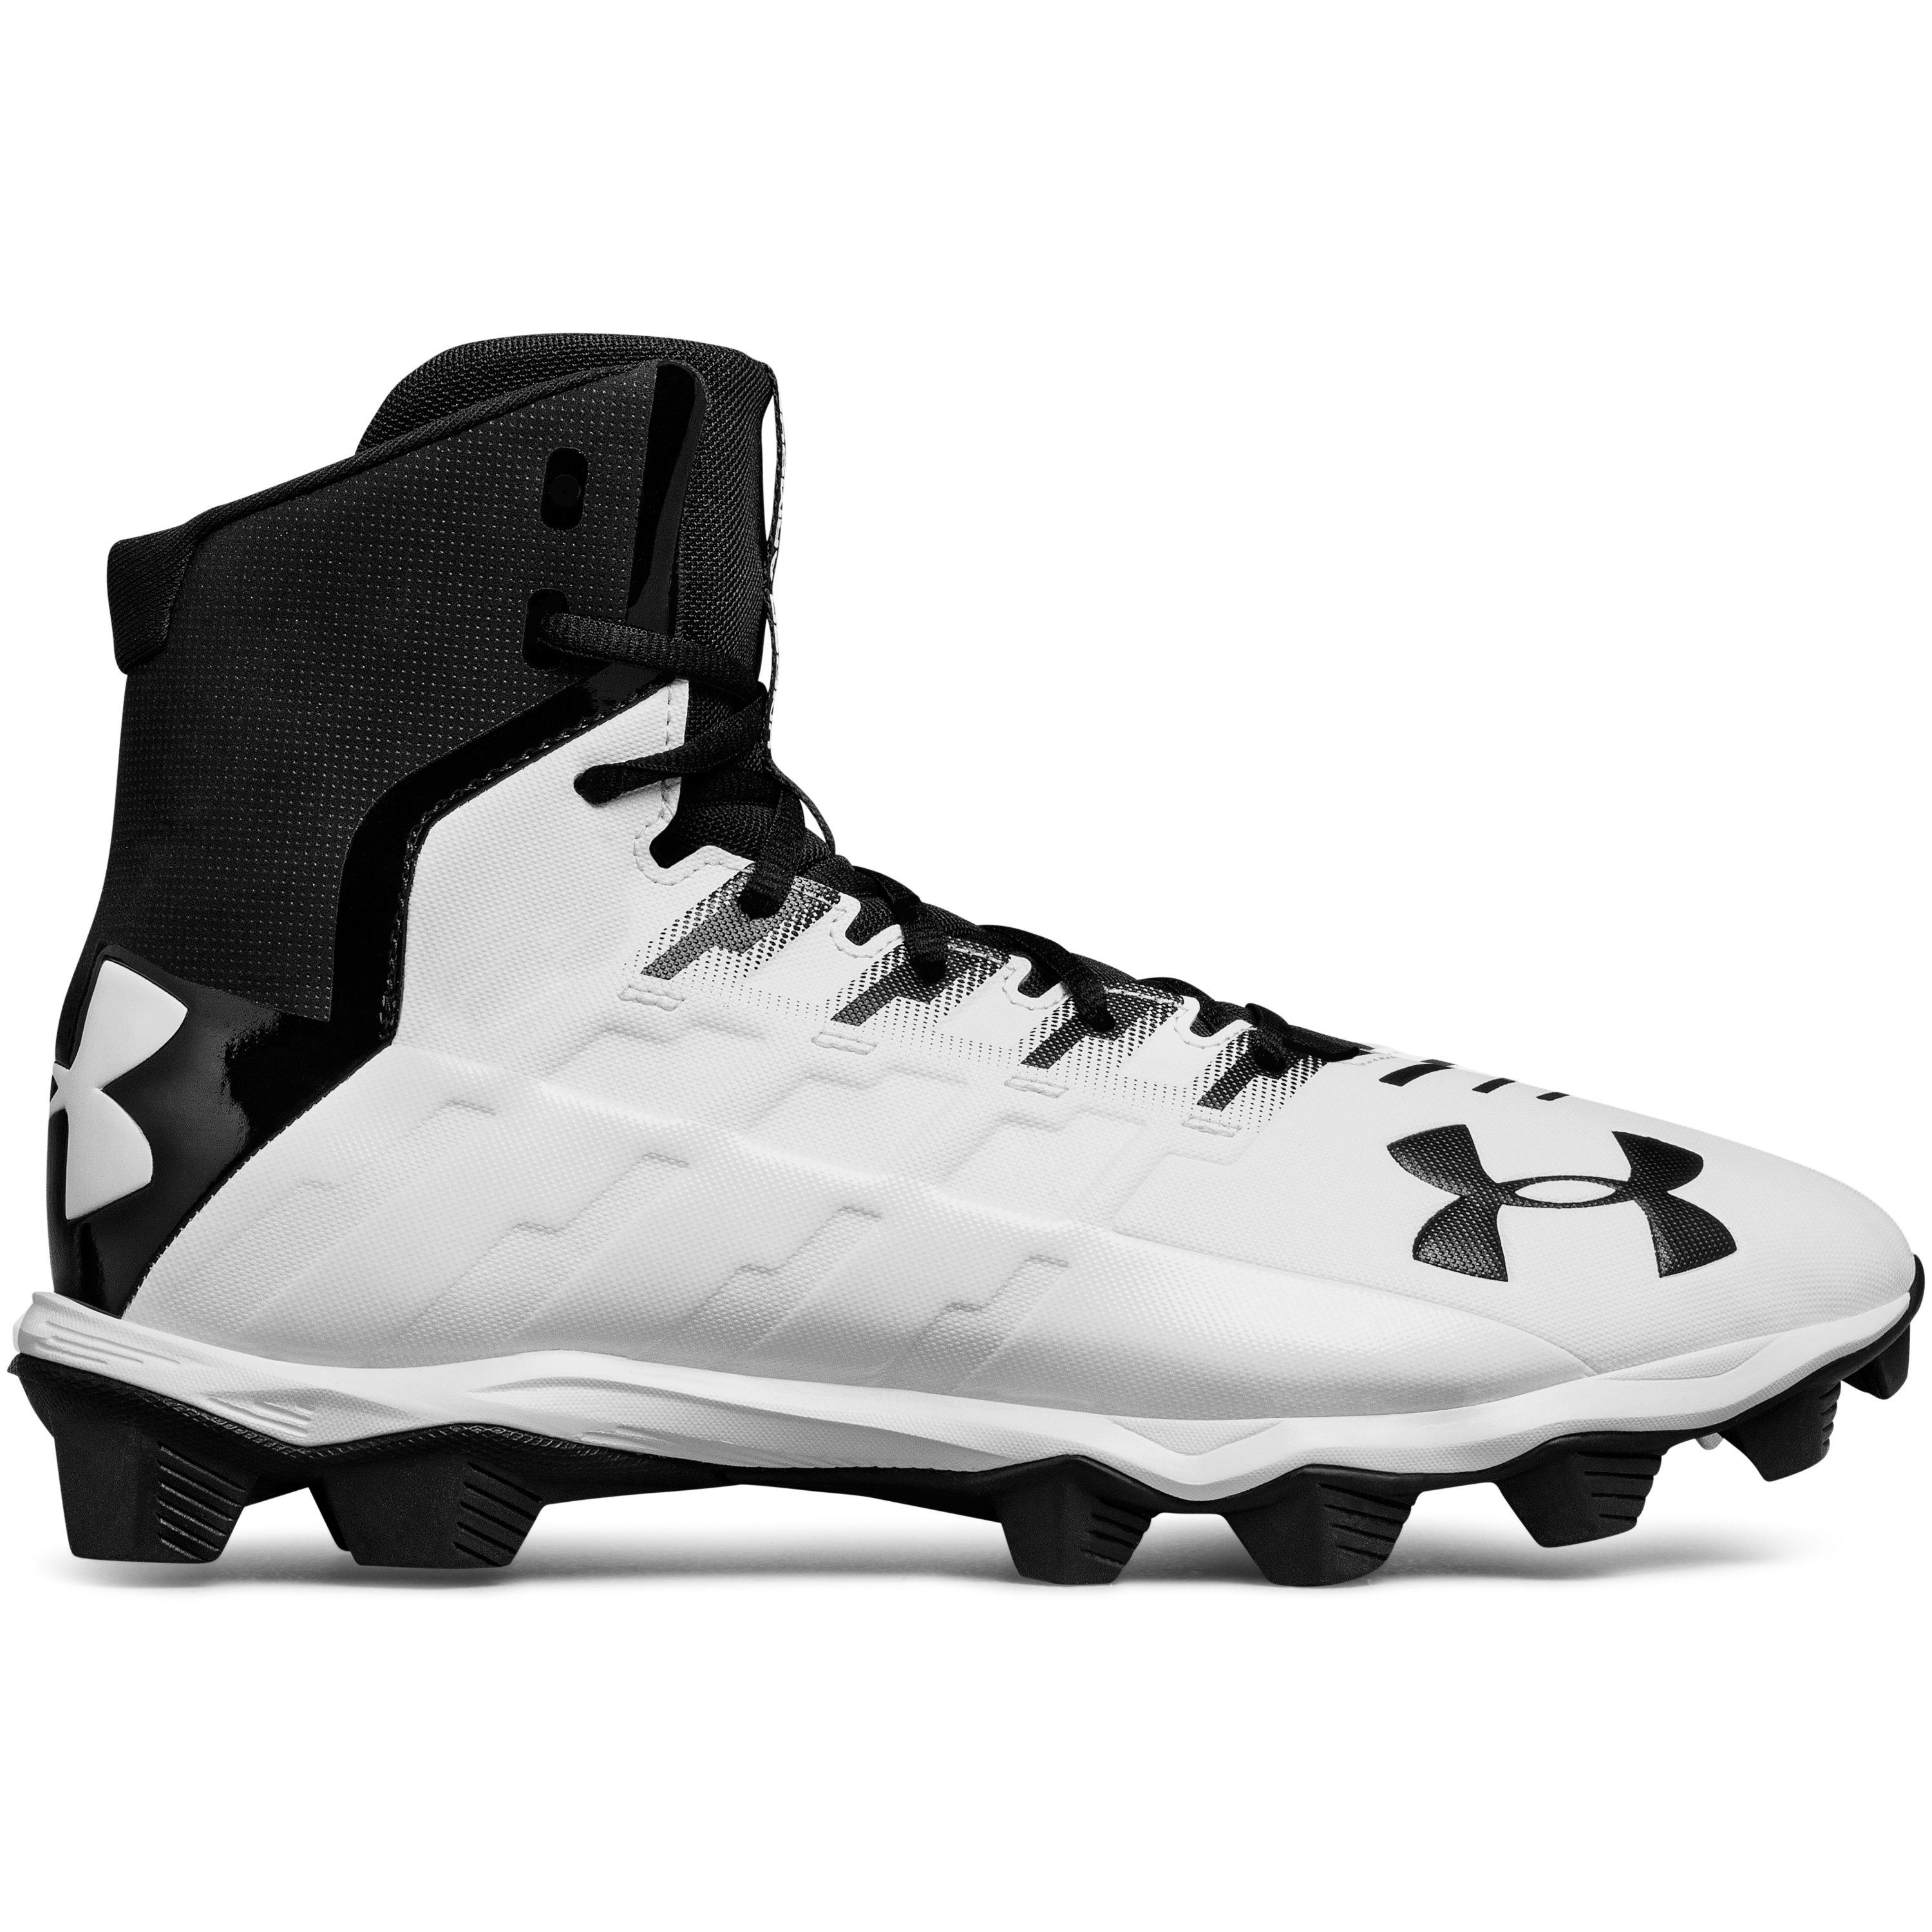 under armour renegade football cleats